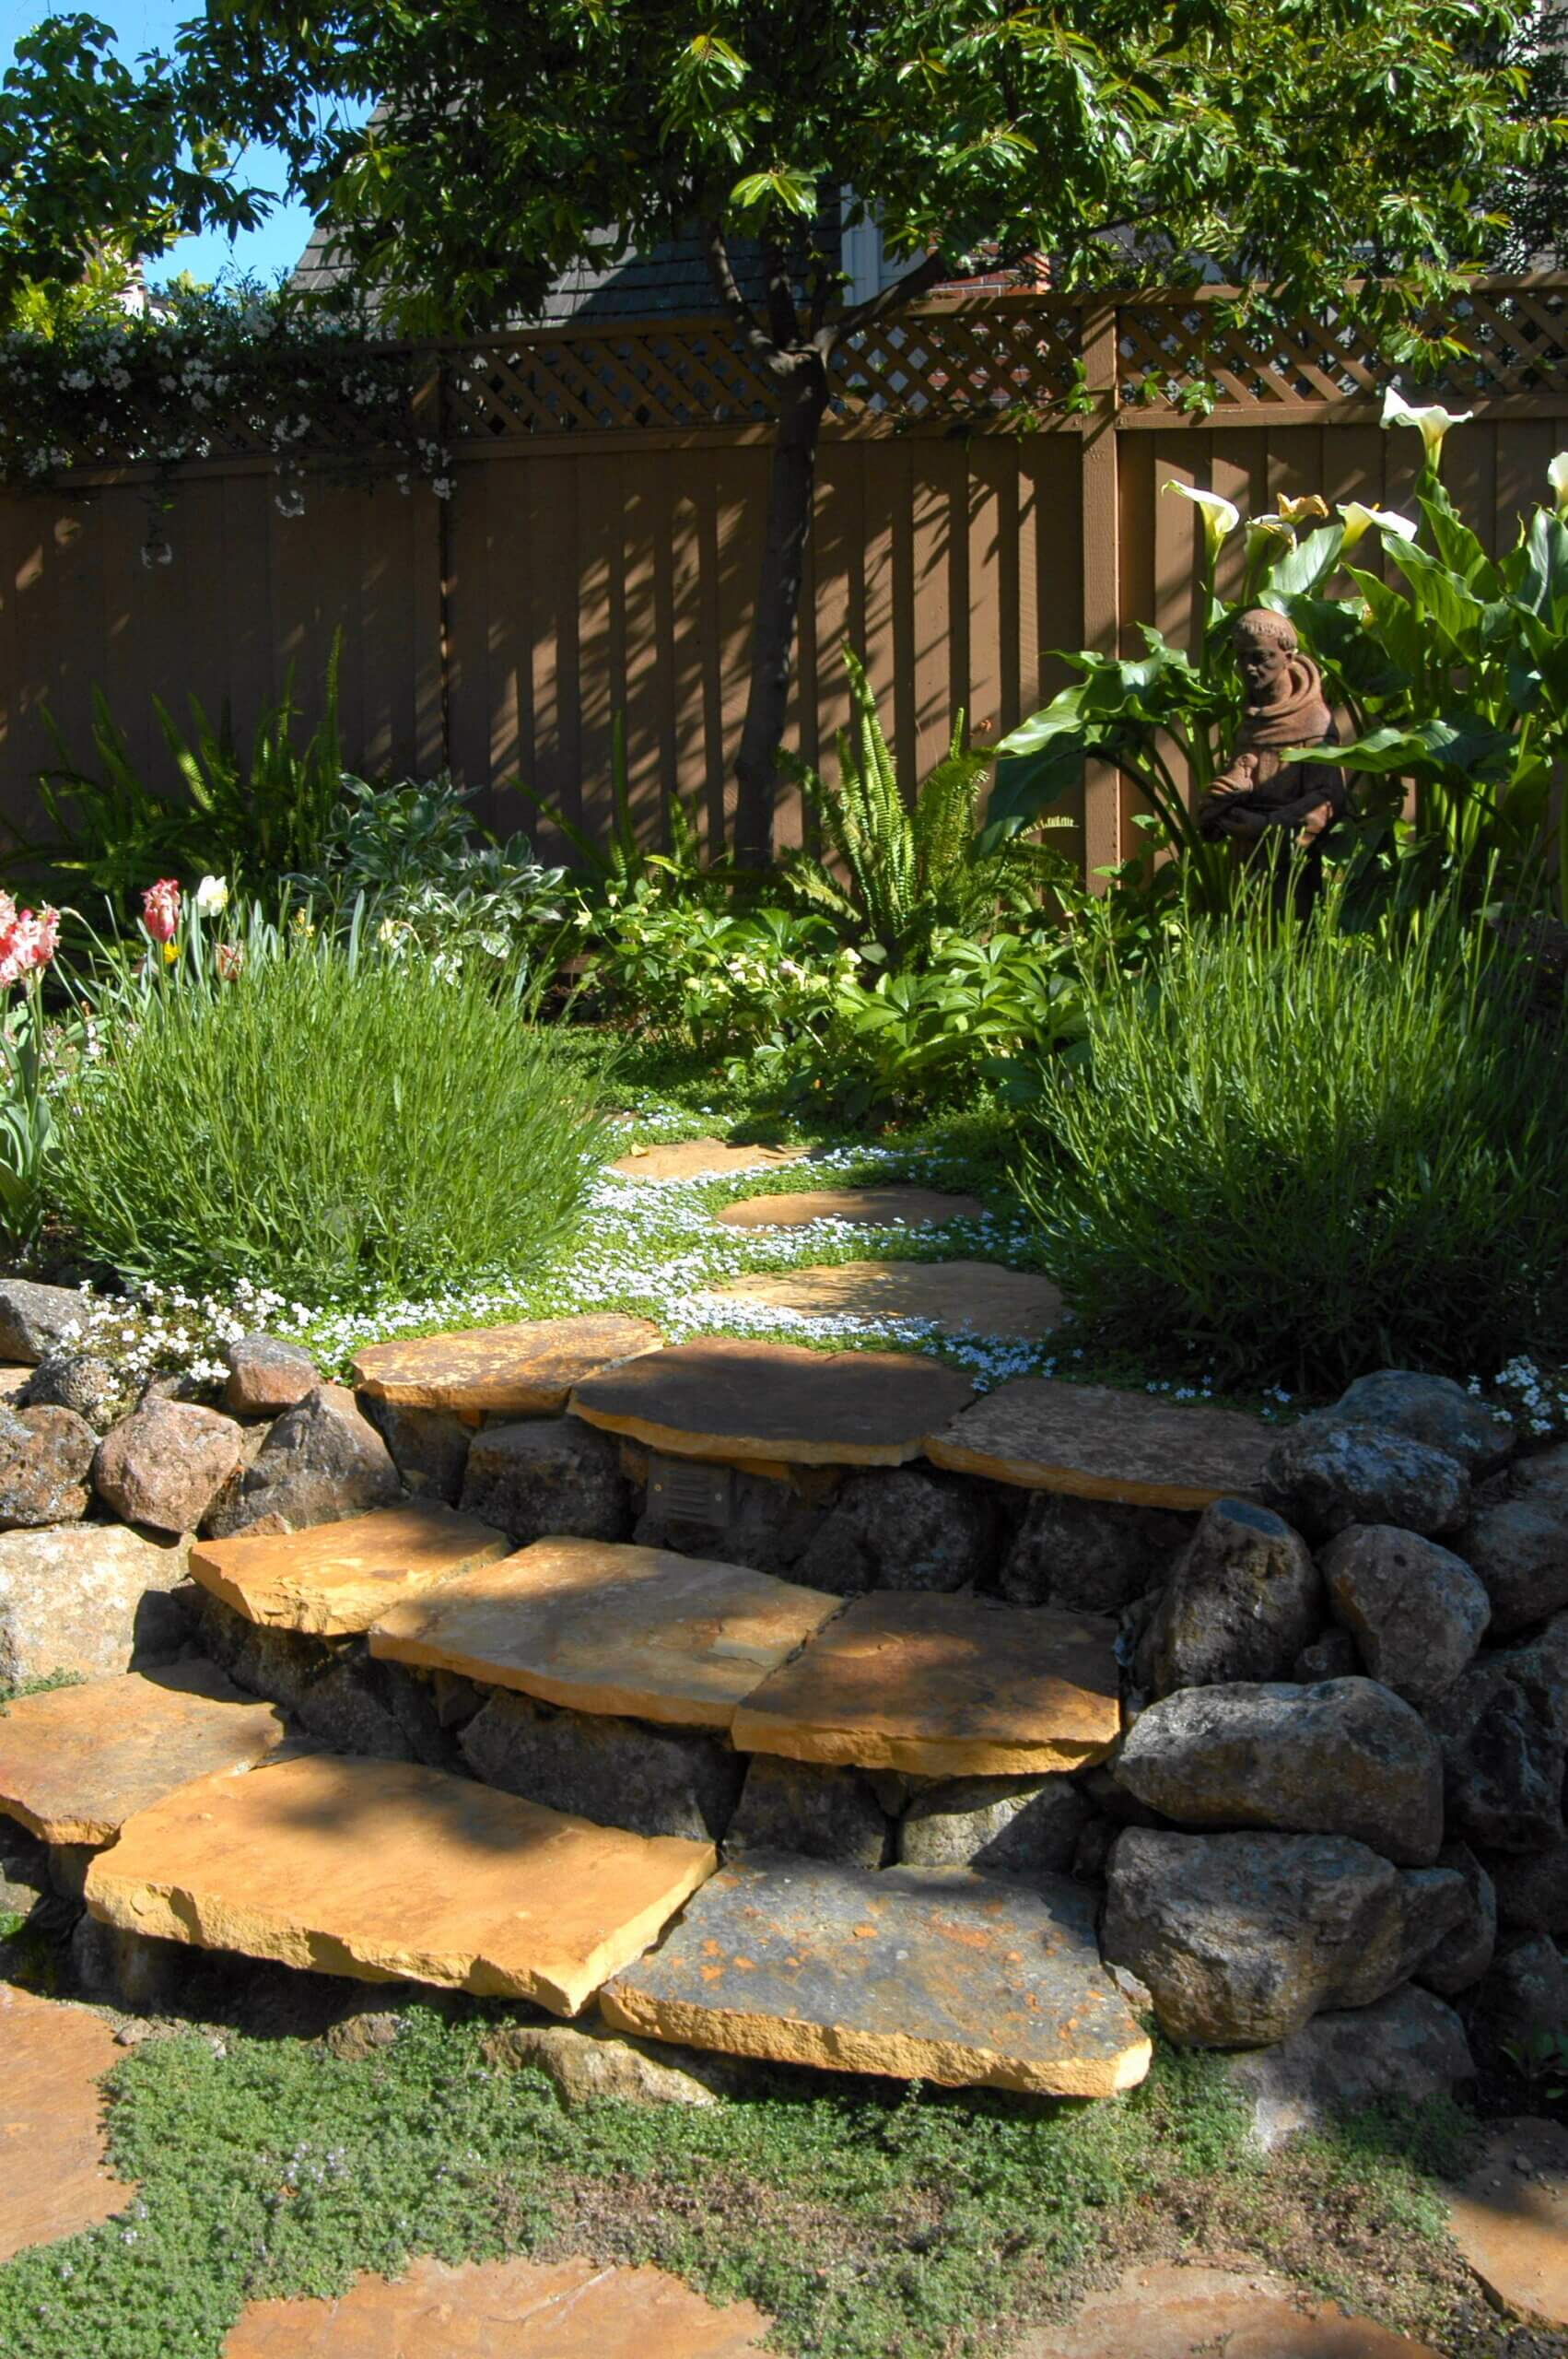 Stone steps and path interlaced with flowering ground cover and grasses